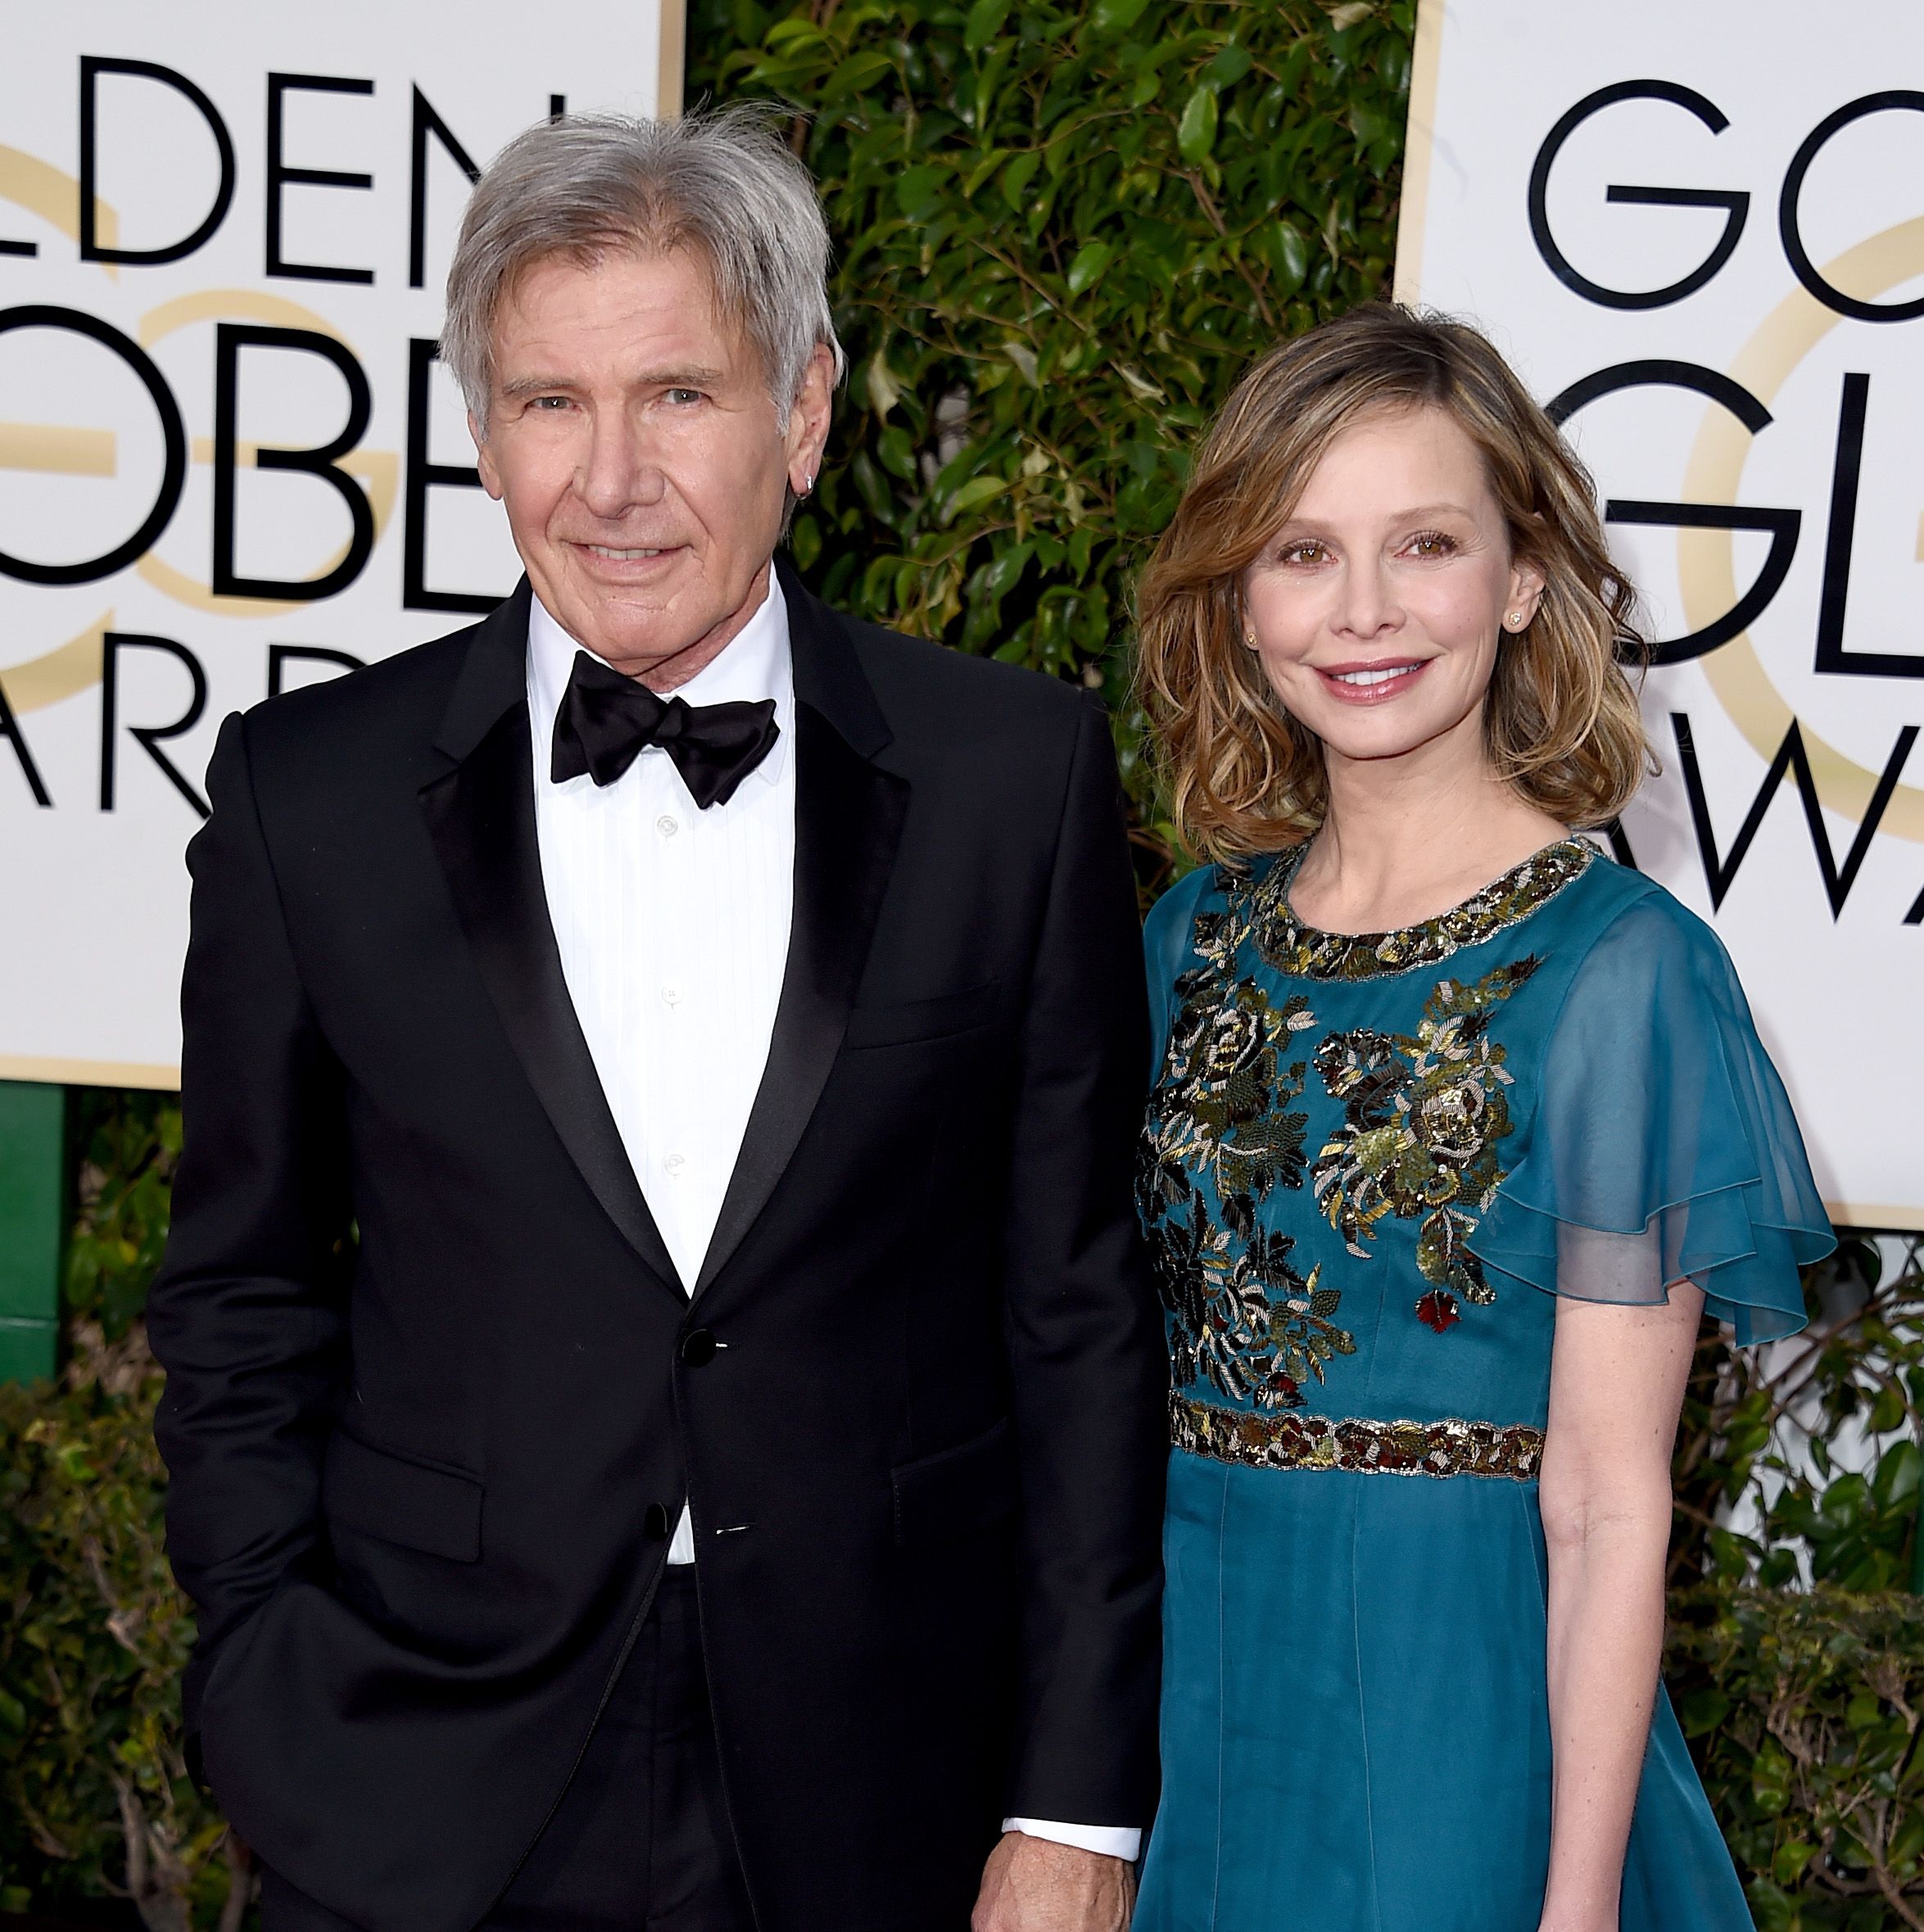 Harrison Ford’s Wife Calista Flockhart Helped Him Through One of His Scariest Moments